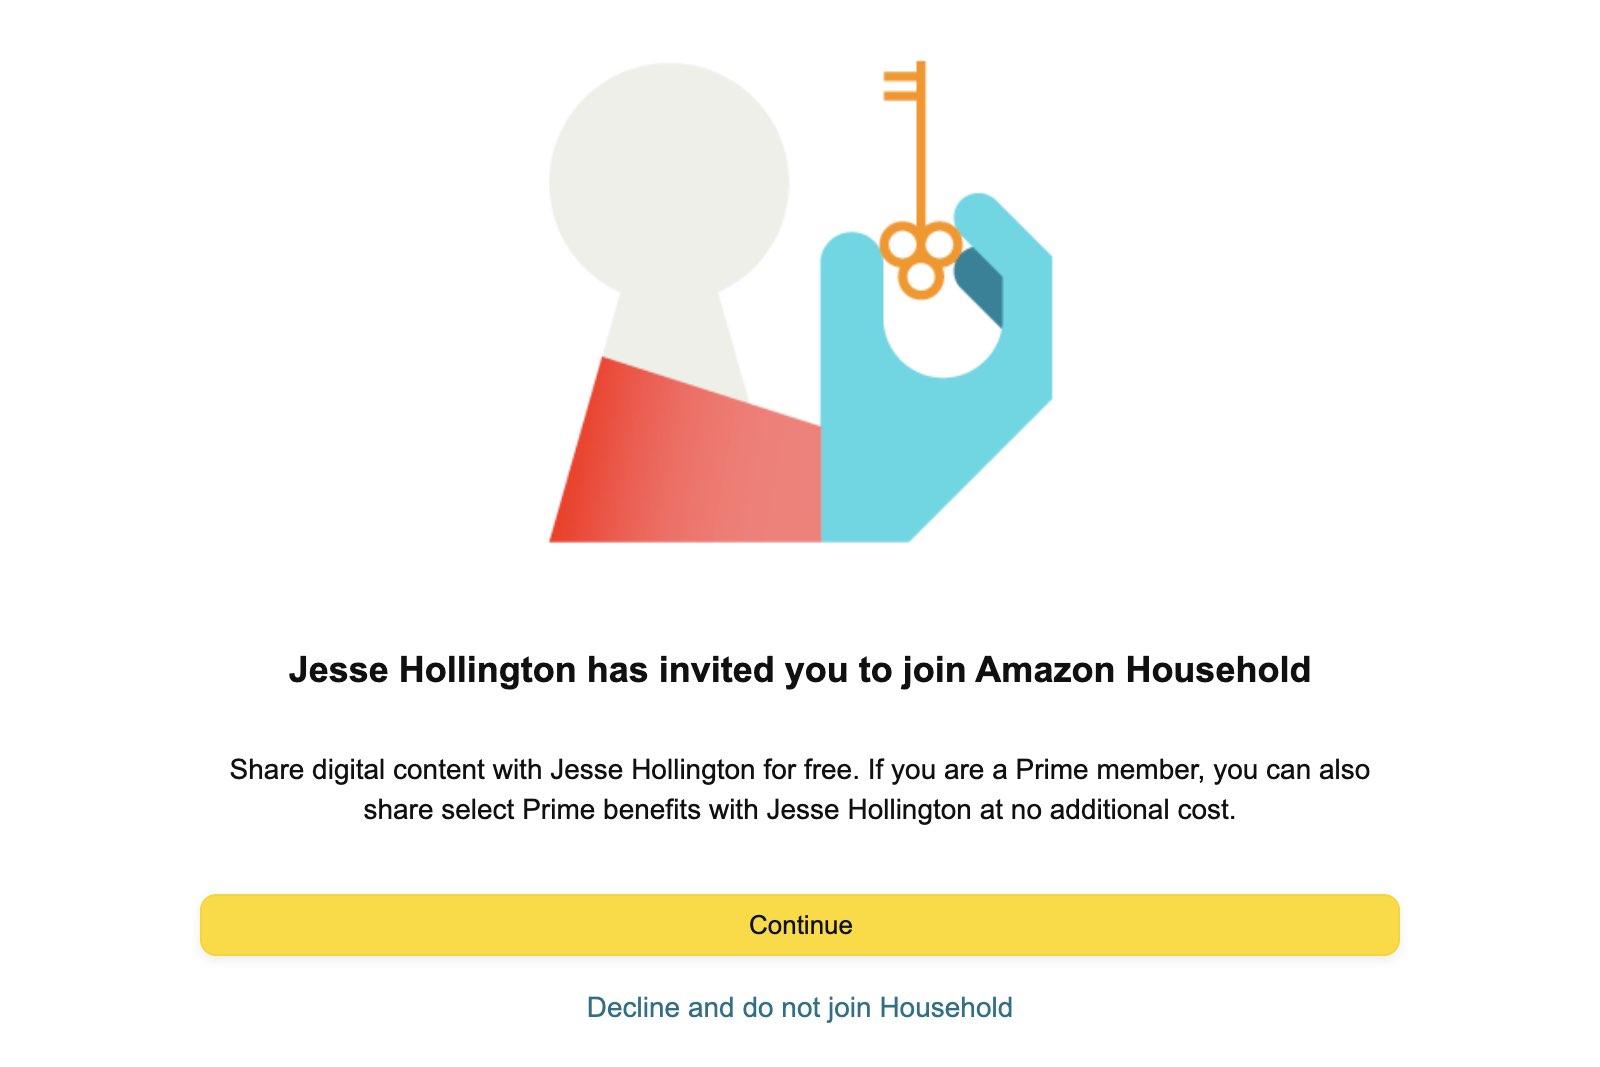 Accepting an Amazon Household invite.